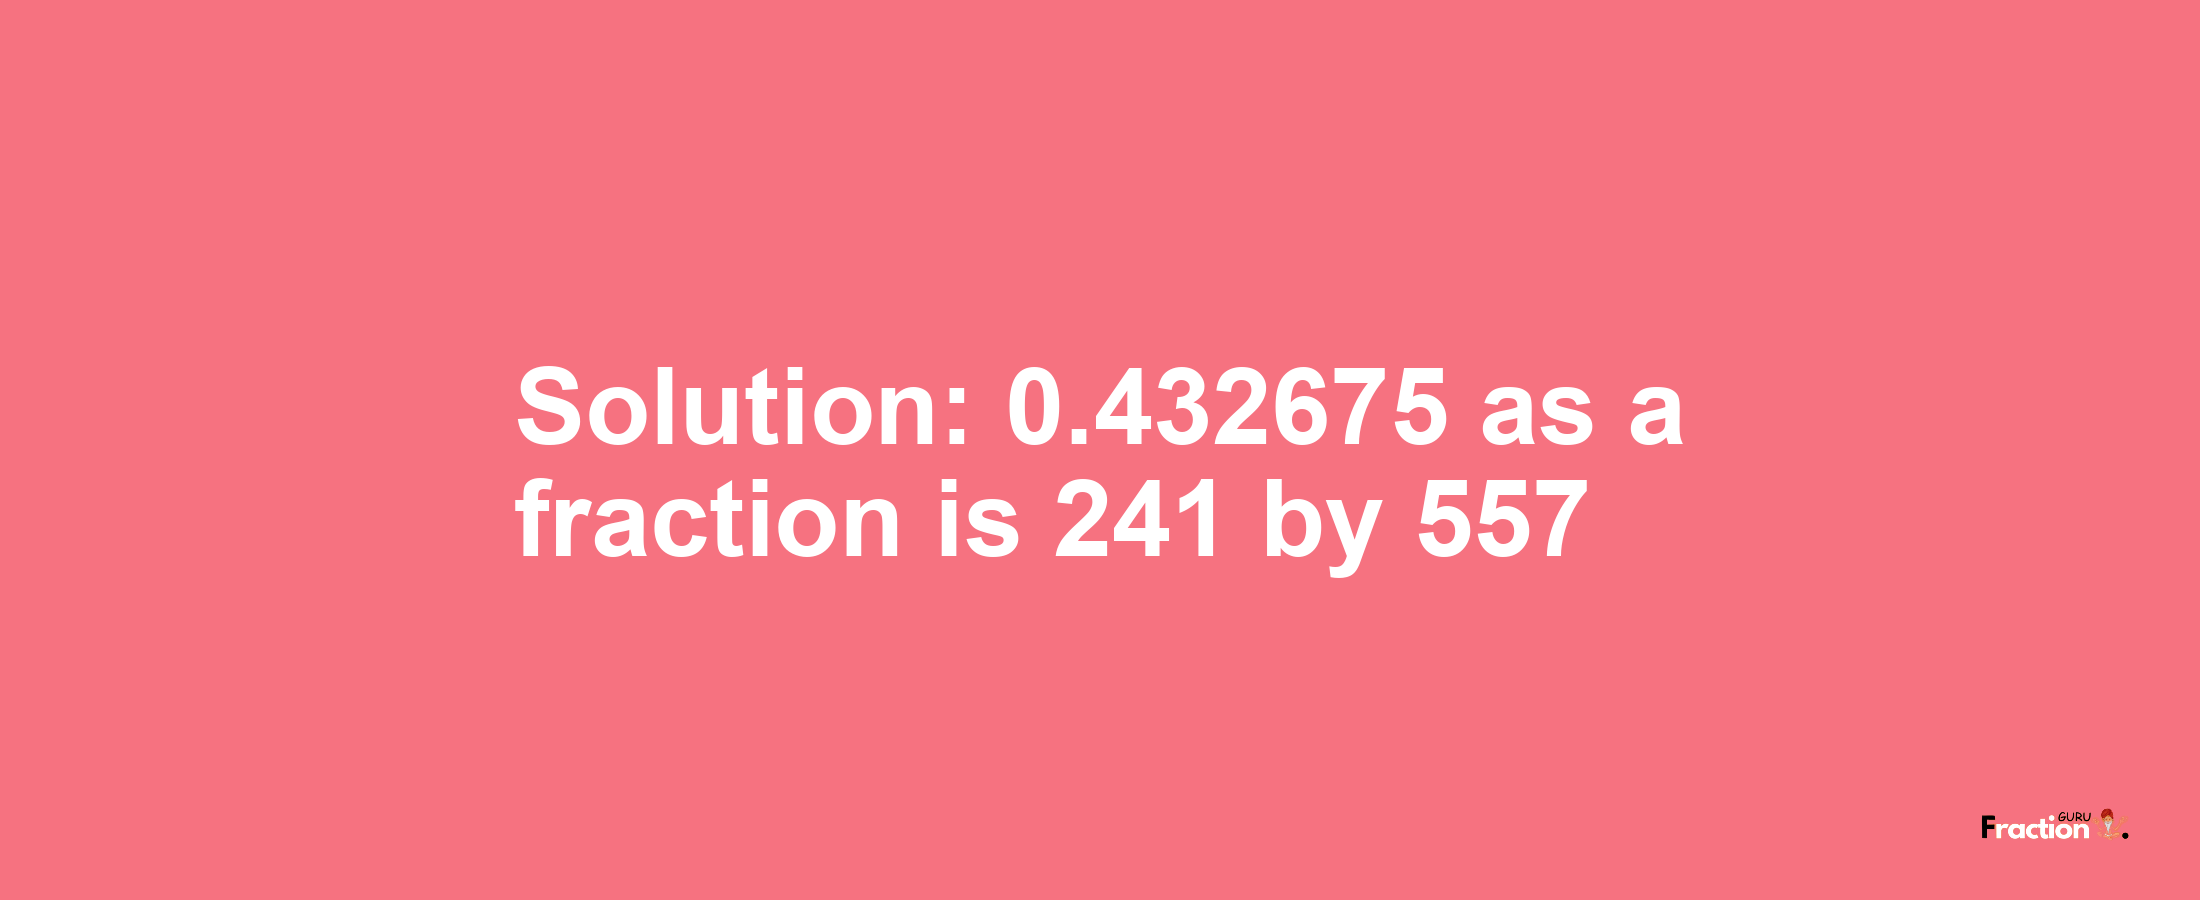 Solution:0.432675 as a fraction is 241/557